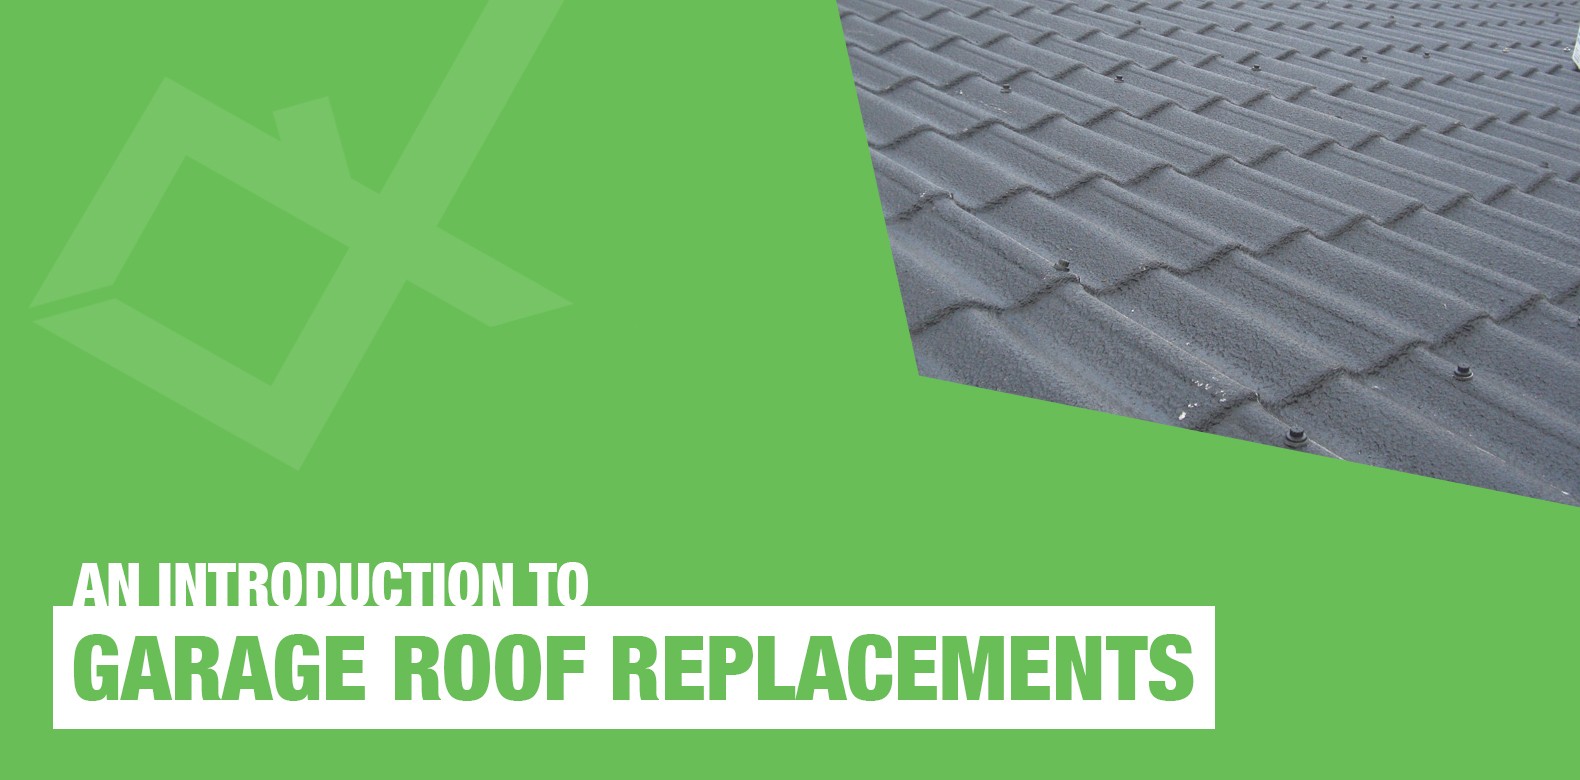 Hero image for garage roof replacement guide.